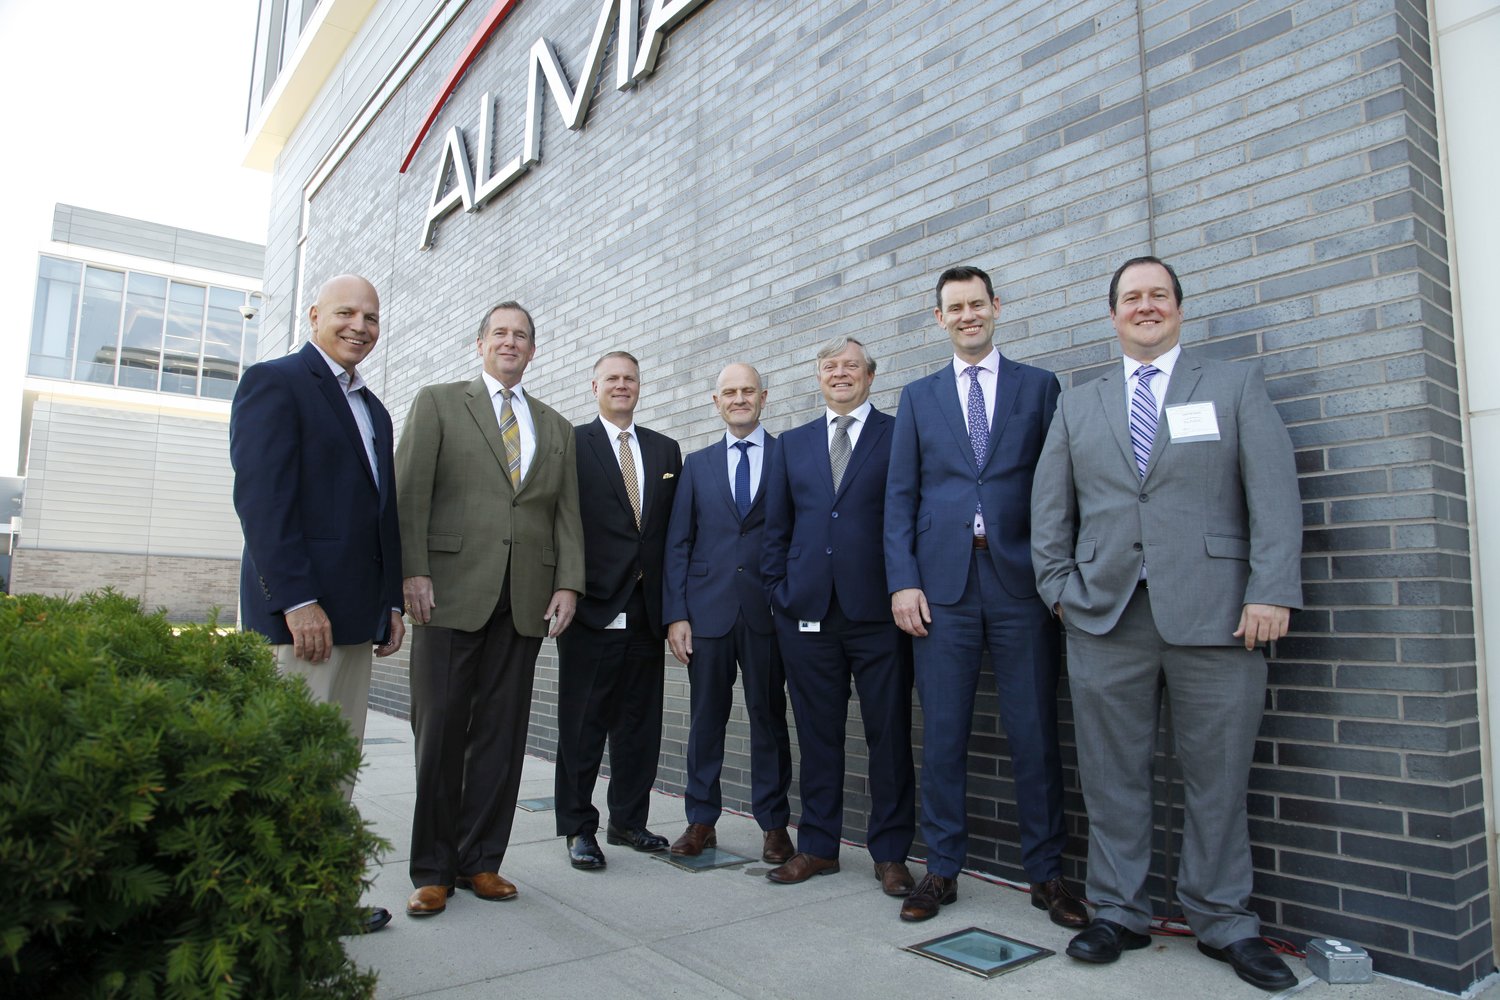 Jim Corrigan, left, Almac’s Senior engineering project manager
overseeing the expansion project, as well as executives from Almac’s clinical services business and members of the Almac Board, are photographed with Pennsylvania’s Acting Secretary of Economic and Community Development Neil Weaver.